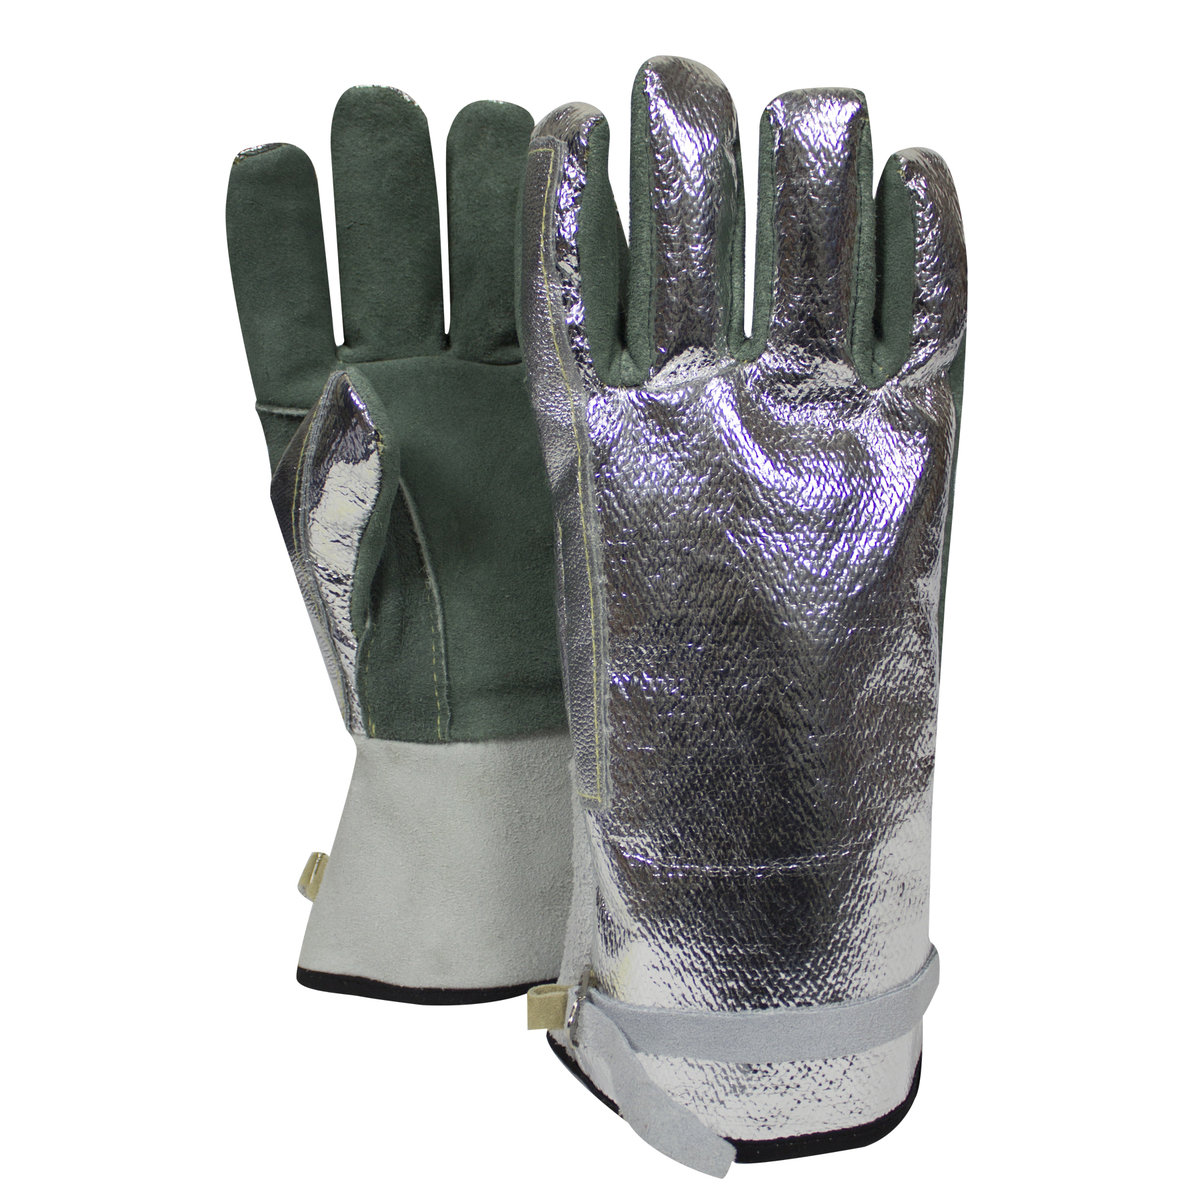 National Safety Apparel® CARBON ARMOUR™ Large Green 18 Ounce Aluminized OPF/DuPont™ Kevlar® Heat Resistant Gloves With Wool/Cott